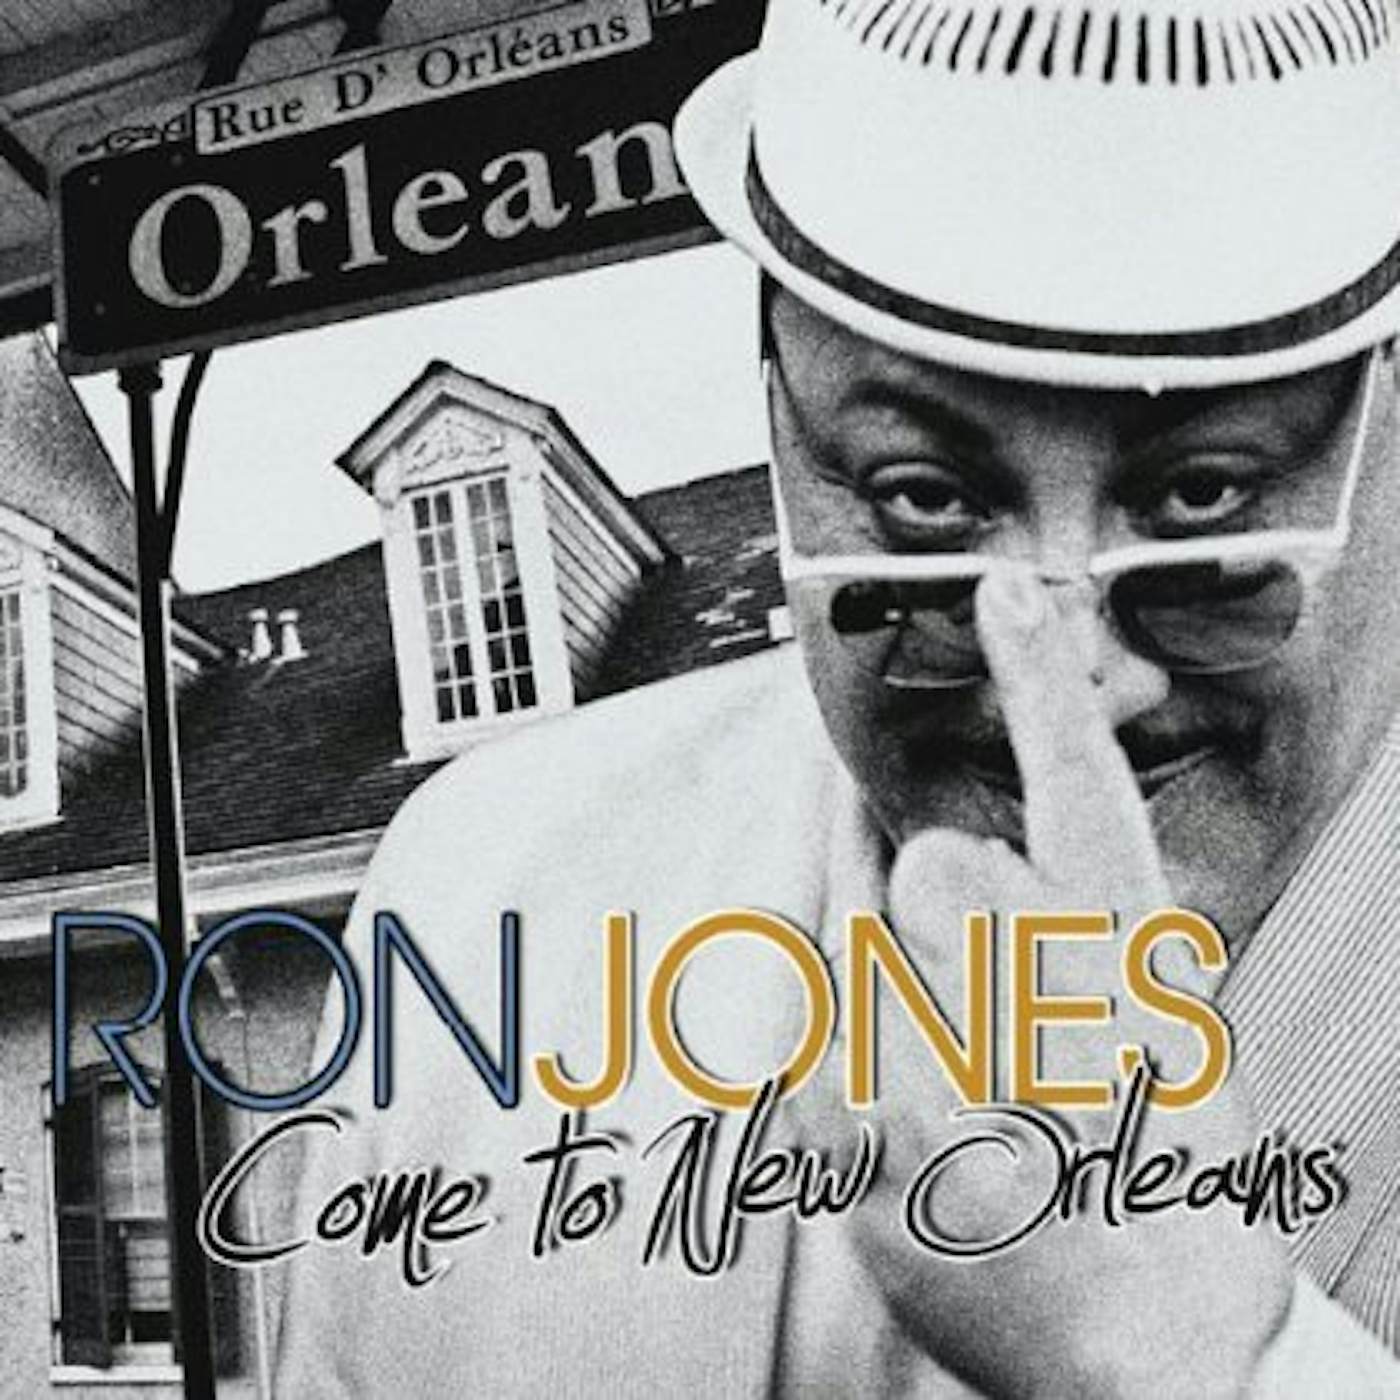 Ron Jones COME TO NEW ORLEANS CD